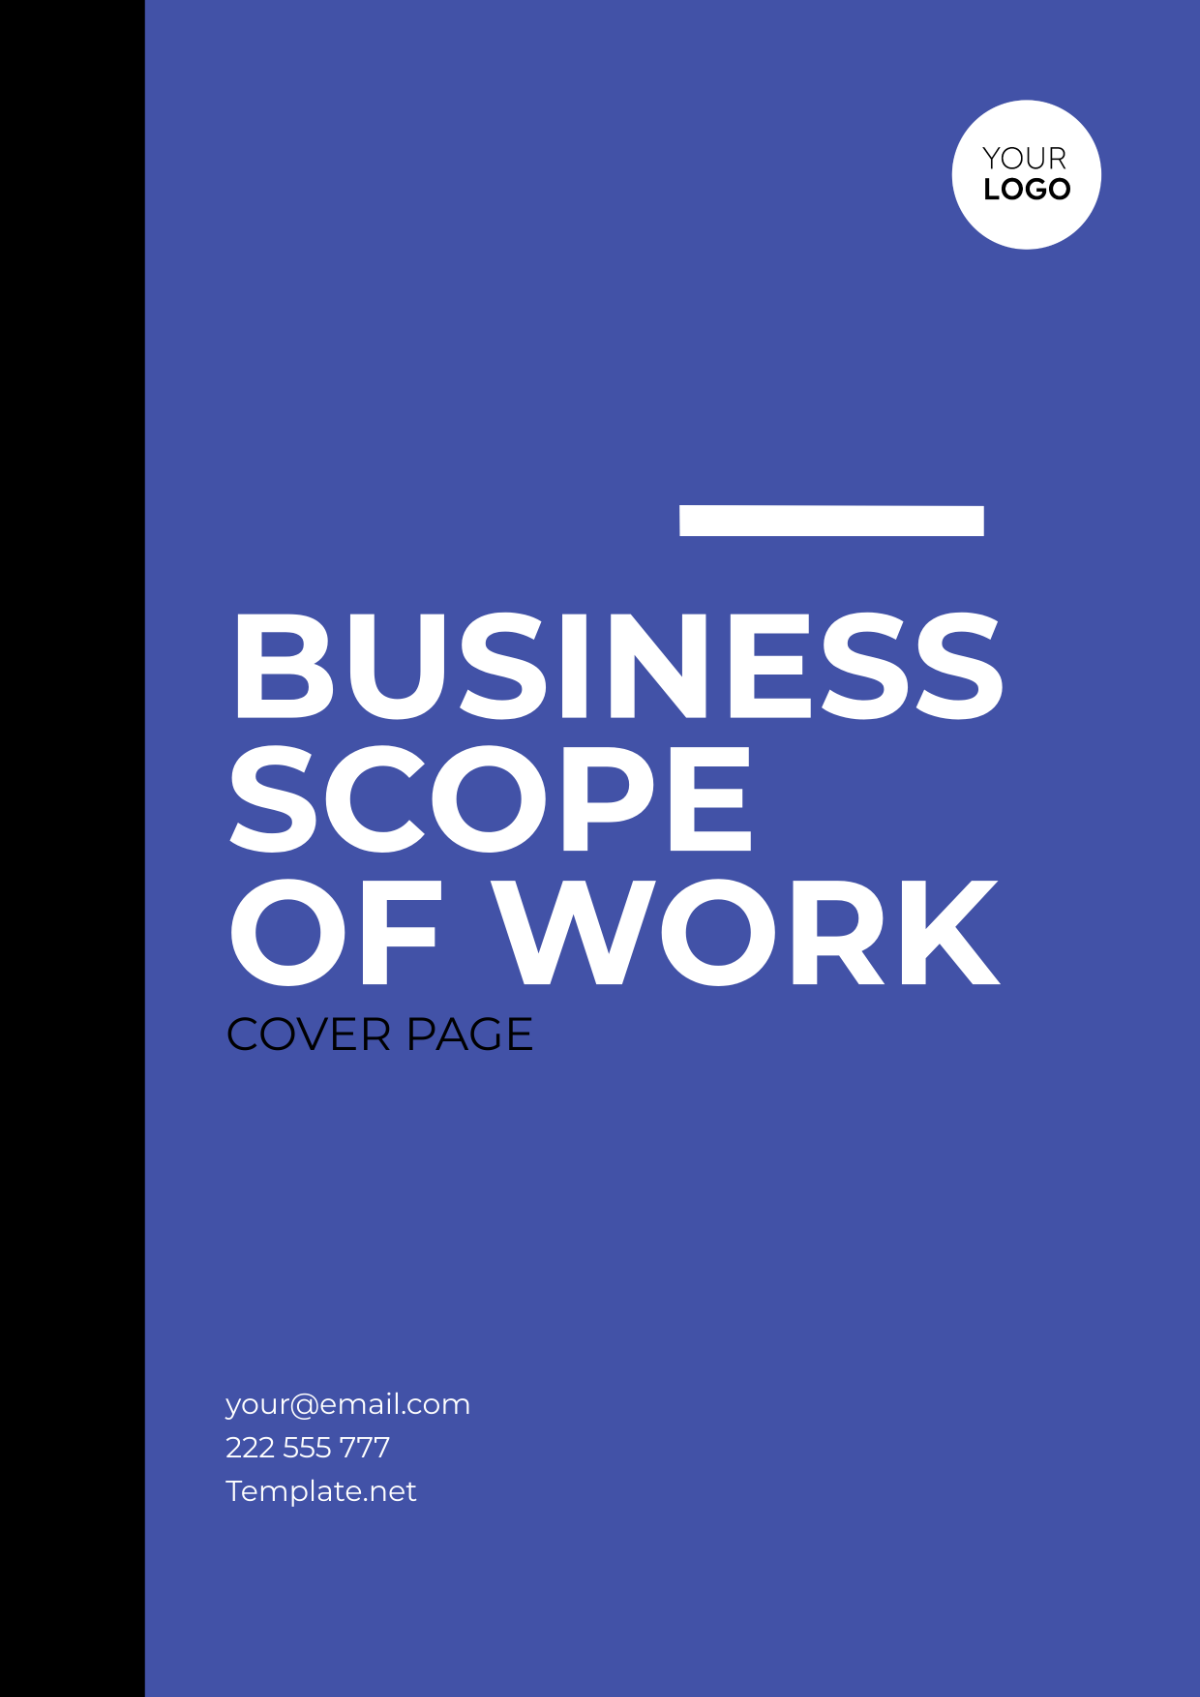 Business Scope of Work Cover Page Template